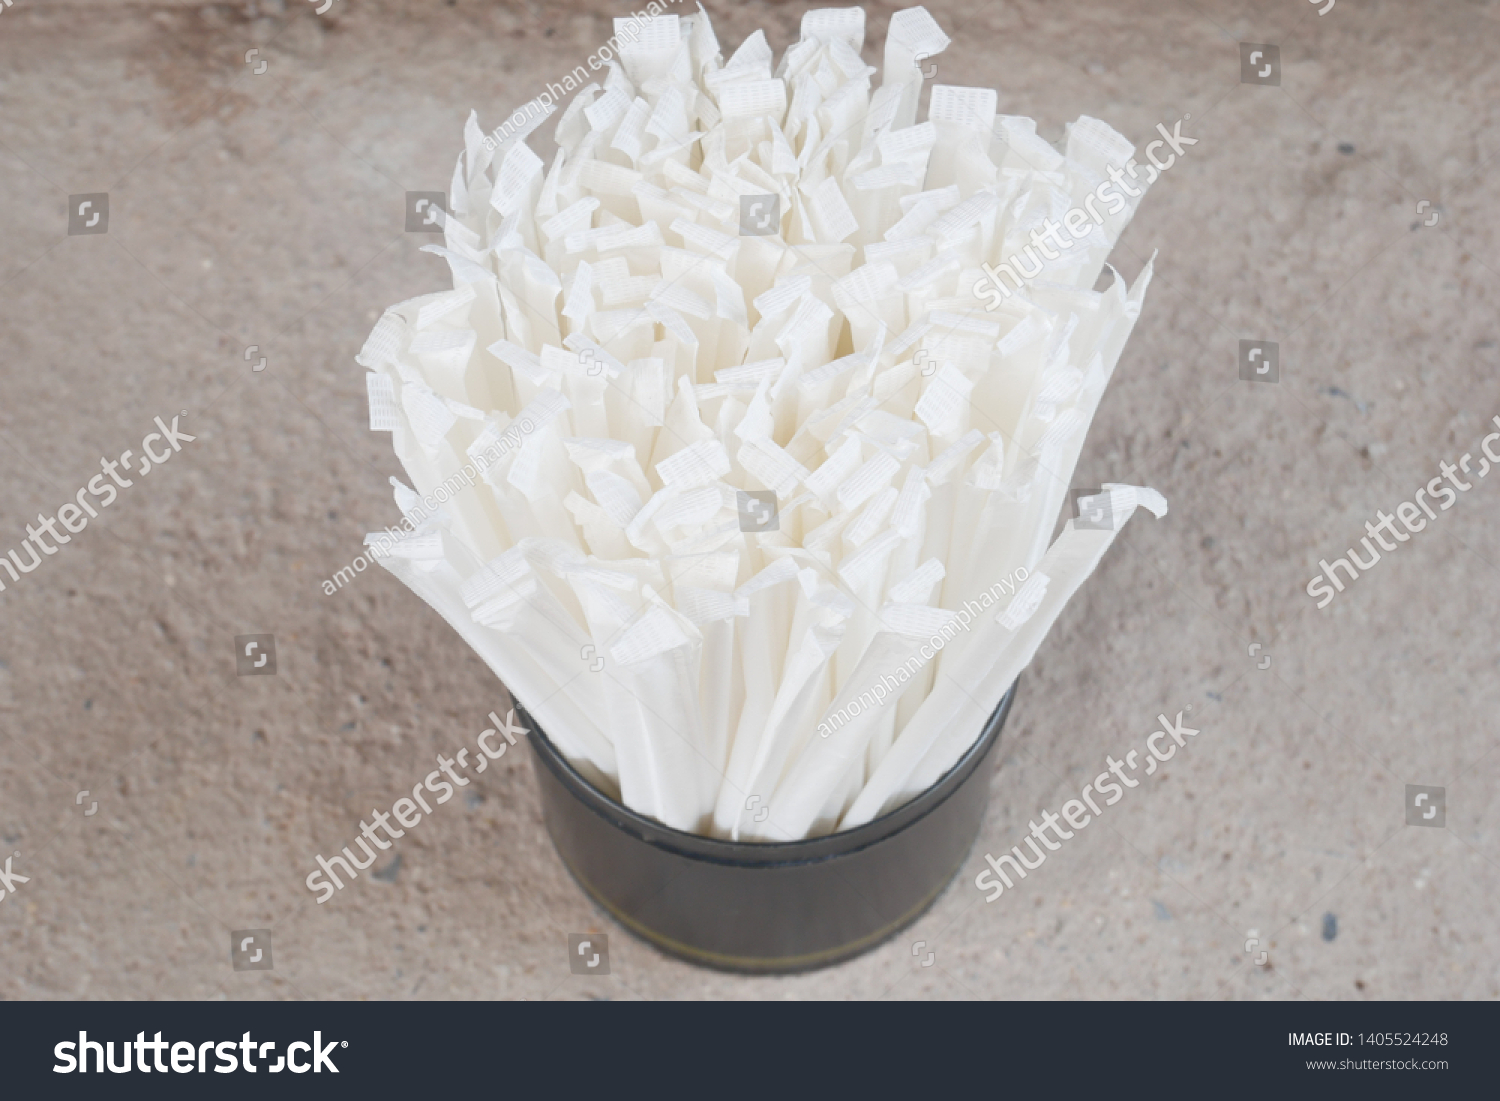 A bundle of wet dewy plastic drinking straws, white drinking straws packing #1405524248